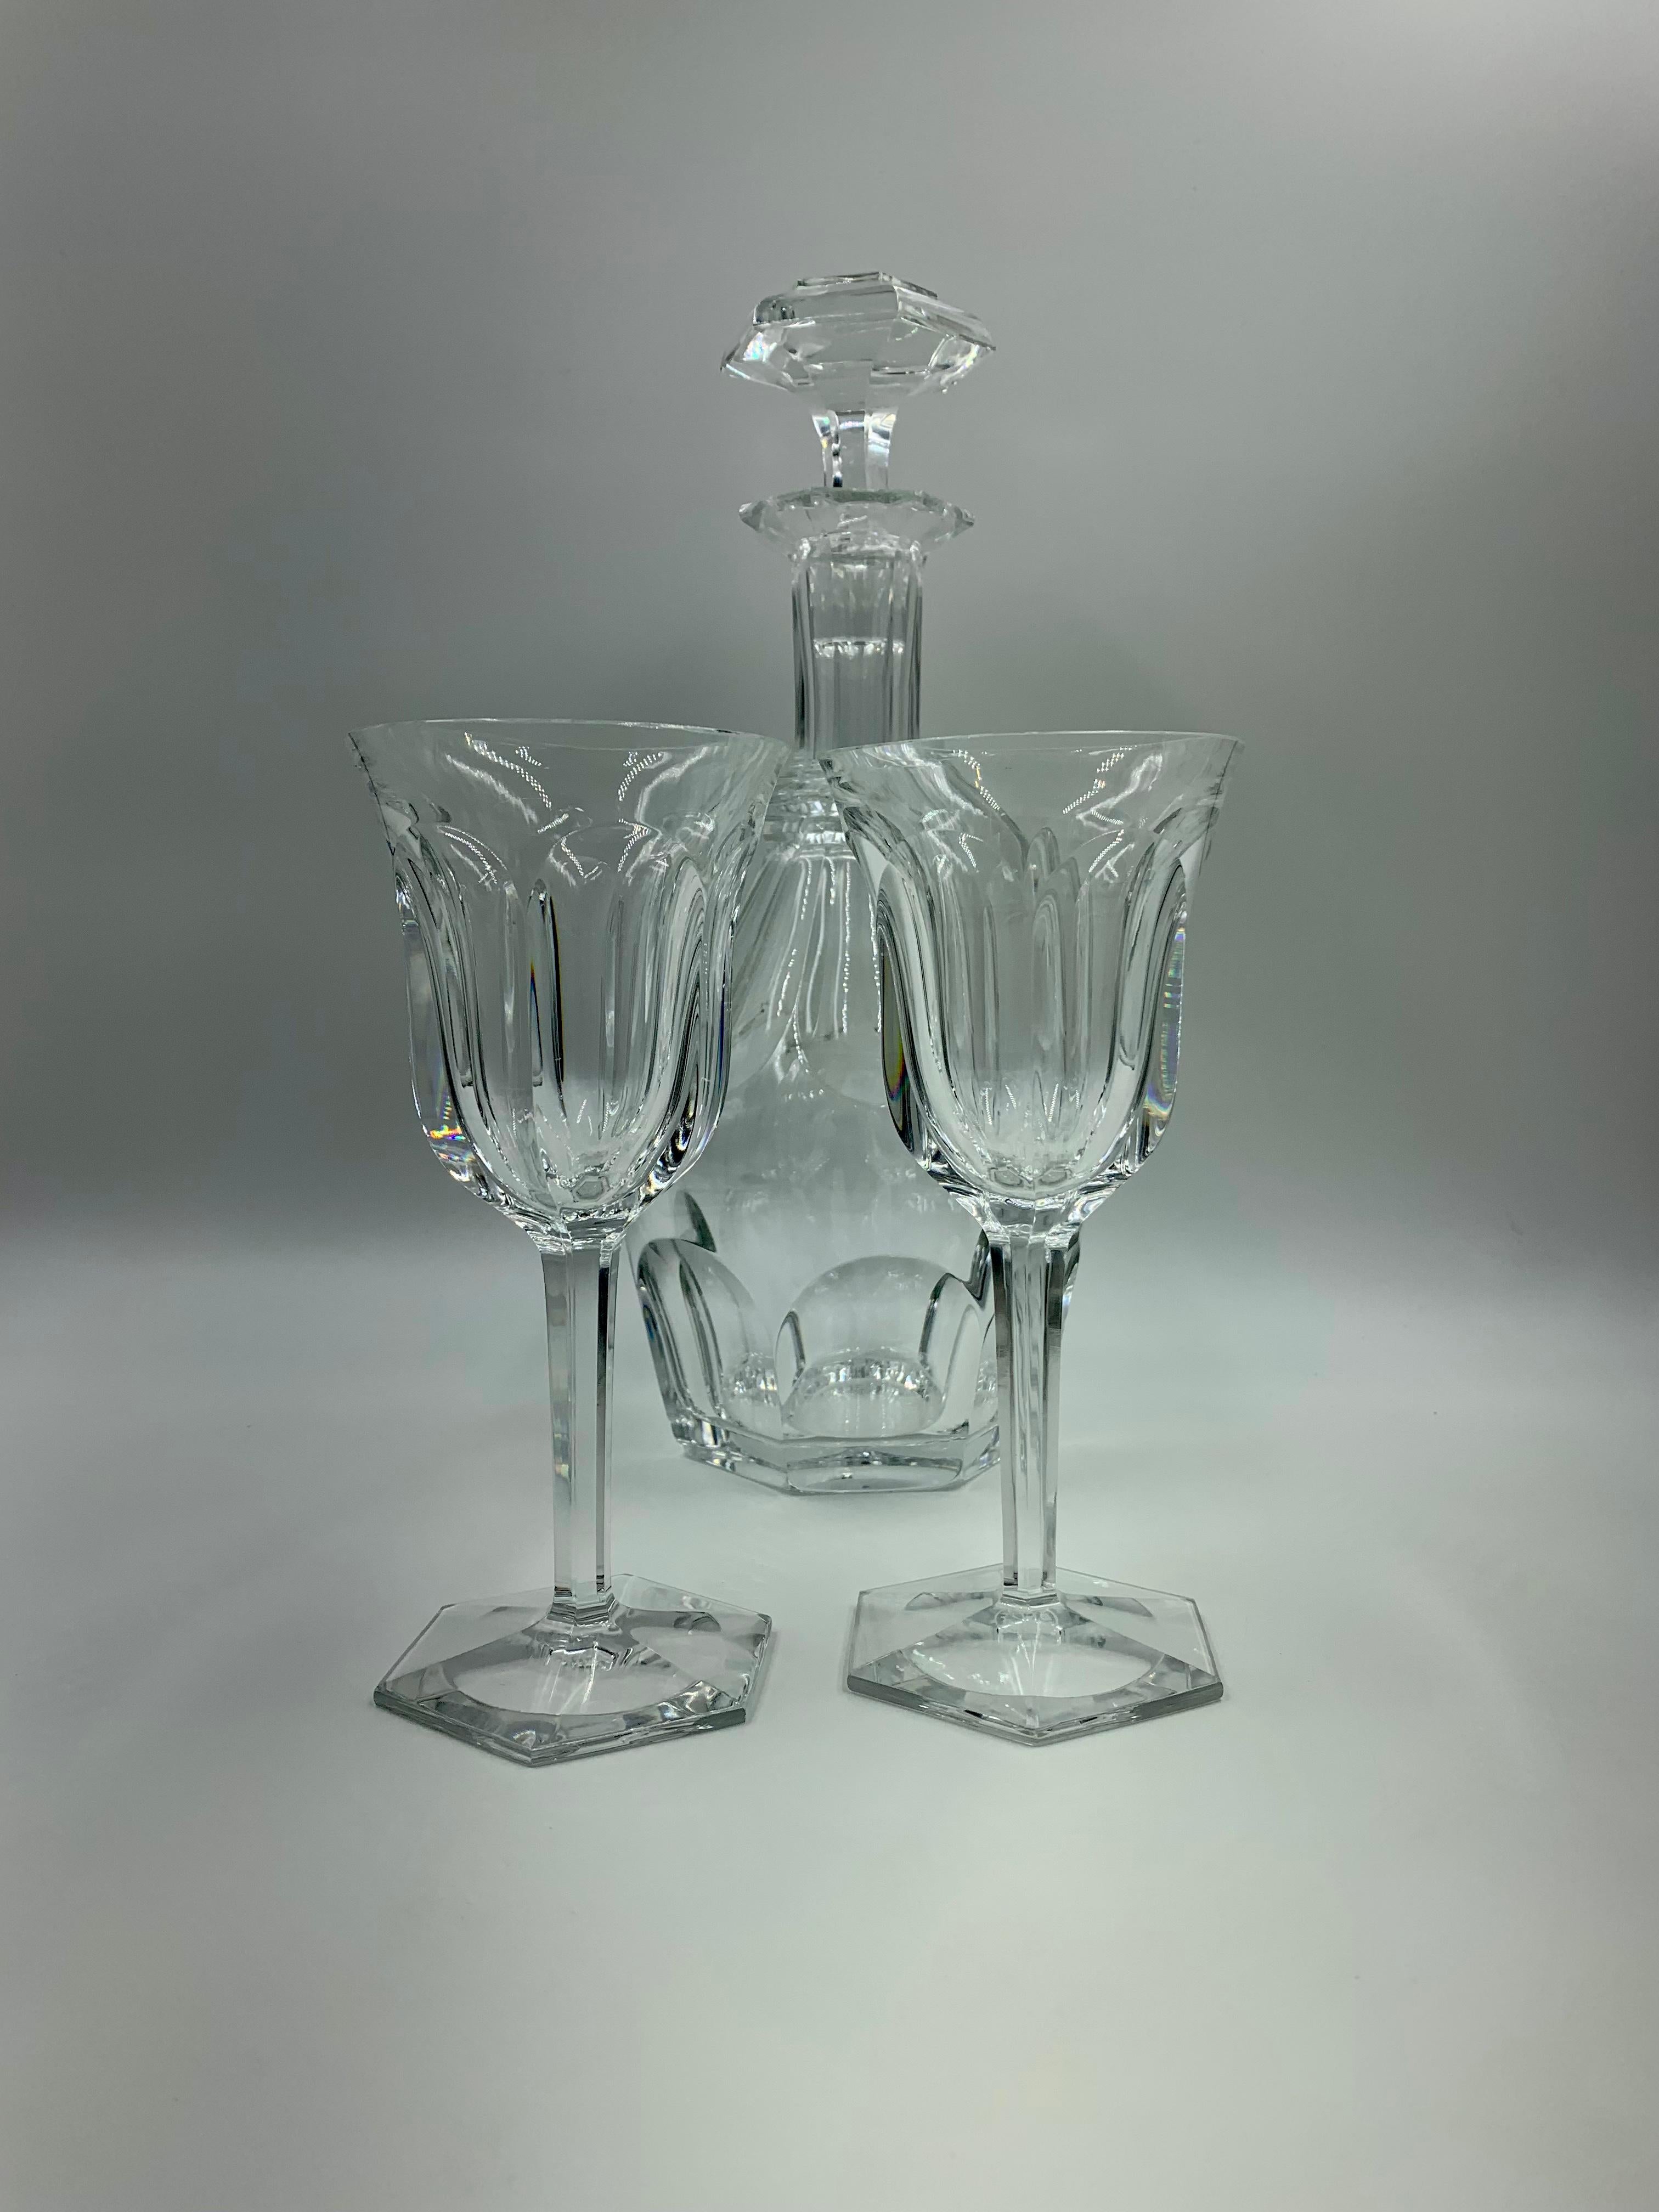 Named after the famed Chateau de Malmaison, Empress Josephine's favorite residence, this is one of Baccarat's most elegant designs. Josephine purchased Malmaison while Napoleon was away in Egypt in 1799. The castle was decorated by Percier and